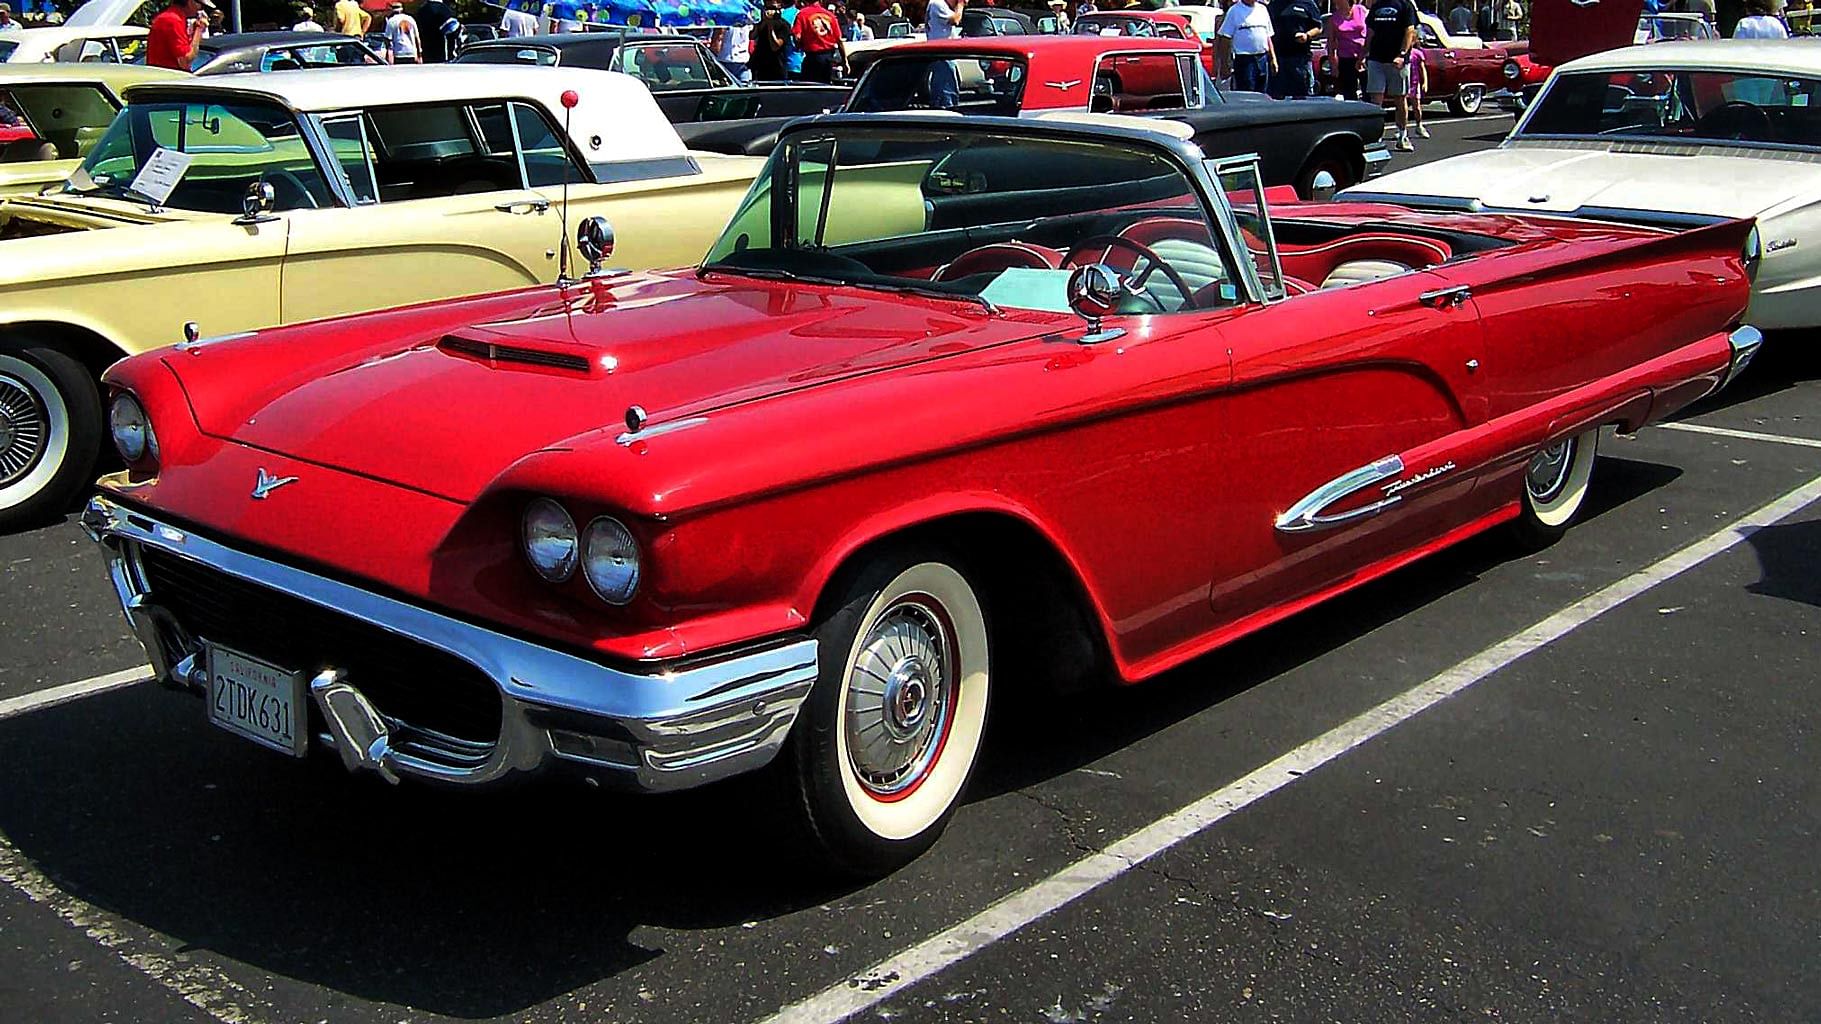 1958 Ford Thunderbird Convertible. (Photo Courtesy: <a href="https://www.forocoches.com/foro/showthread.php?t=1539454">Forocoches</a>)